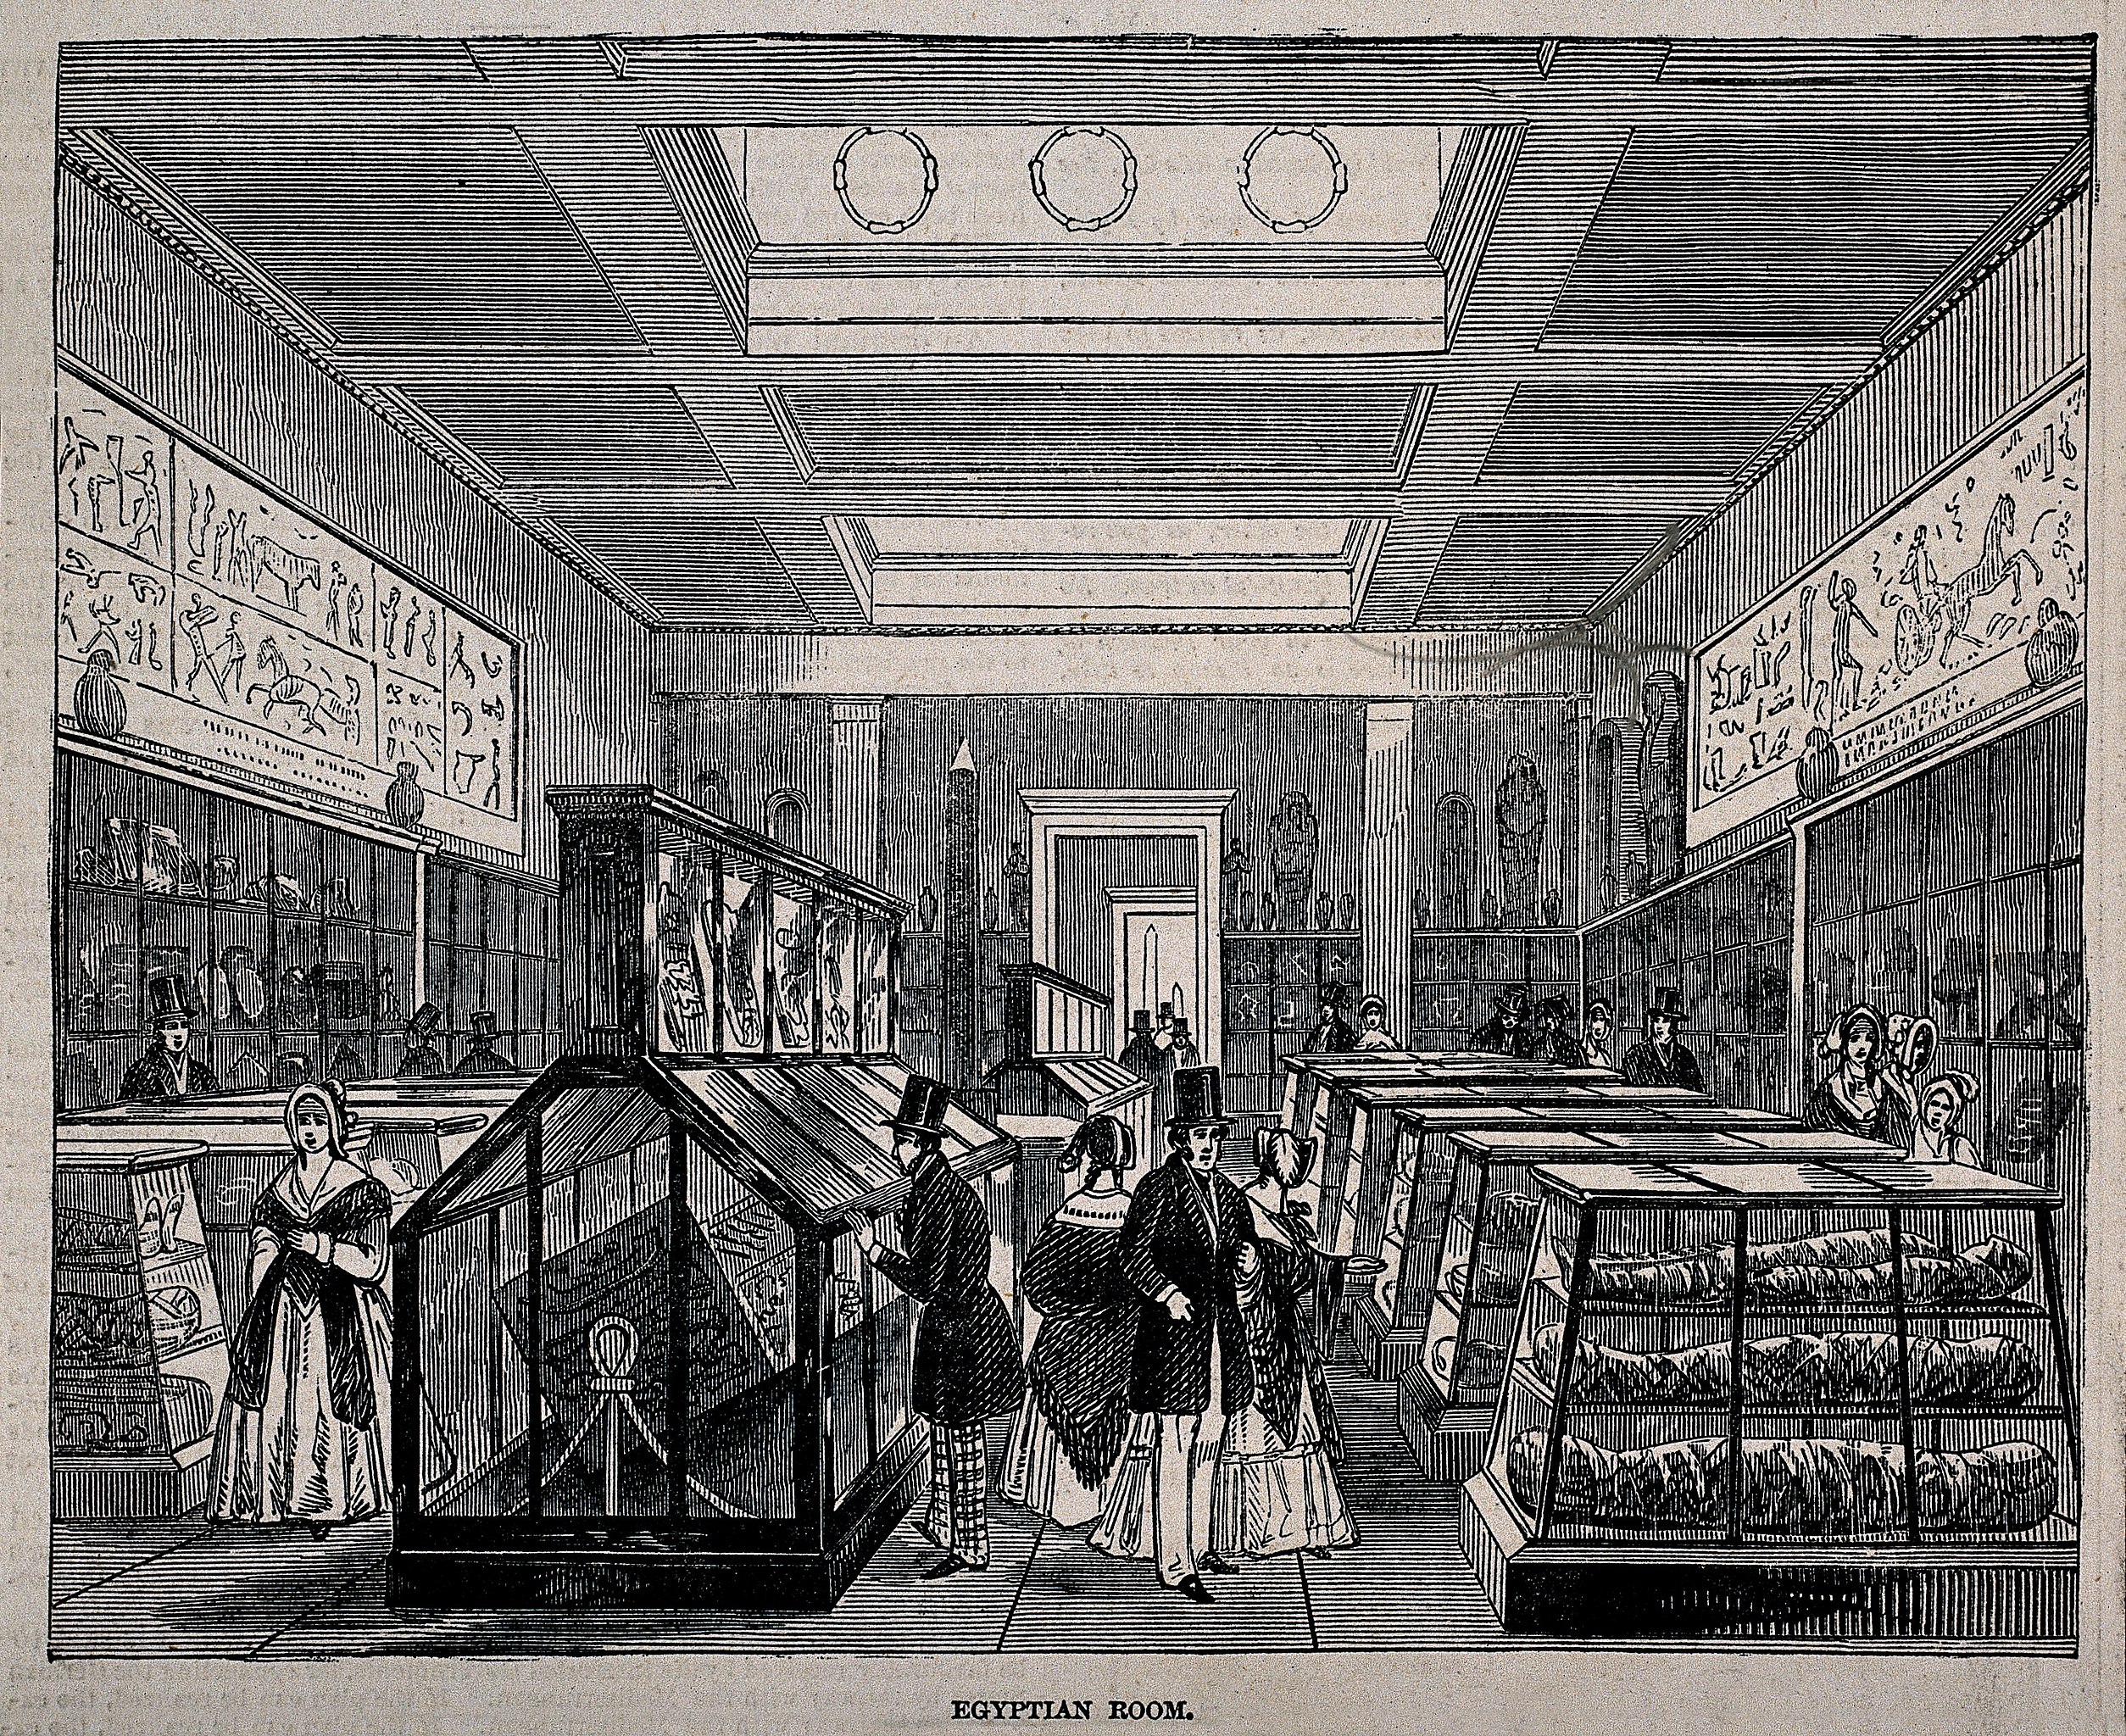 Visitors to the British Museum view the Egyptian Room, 1847.